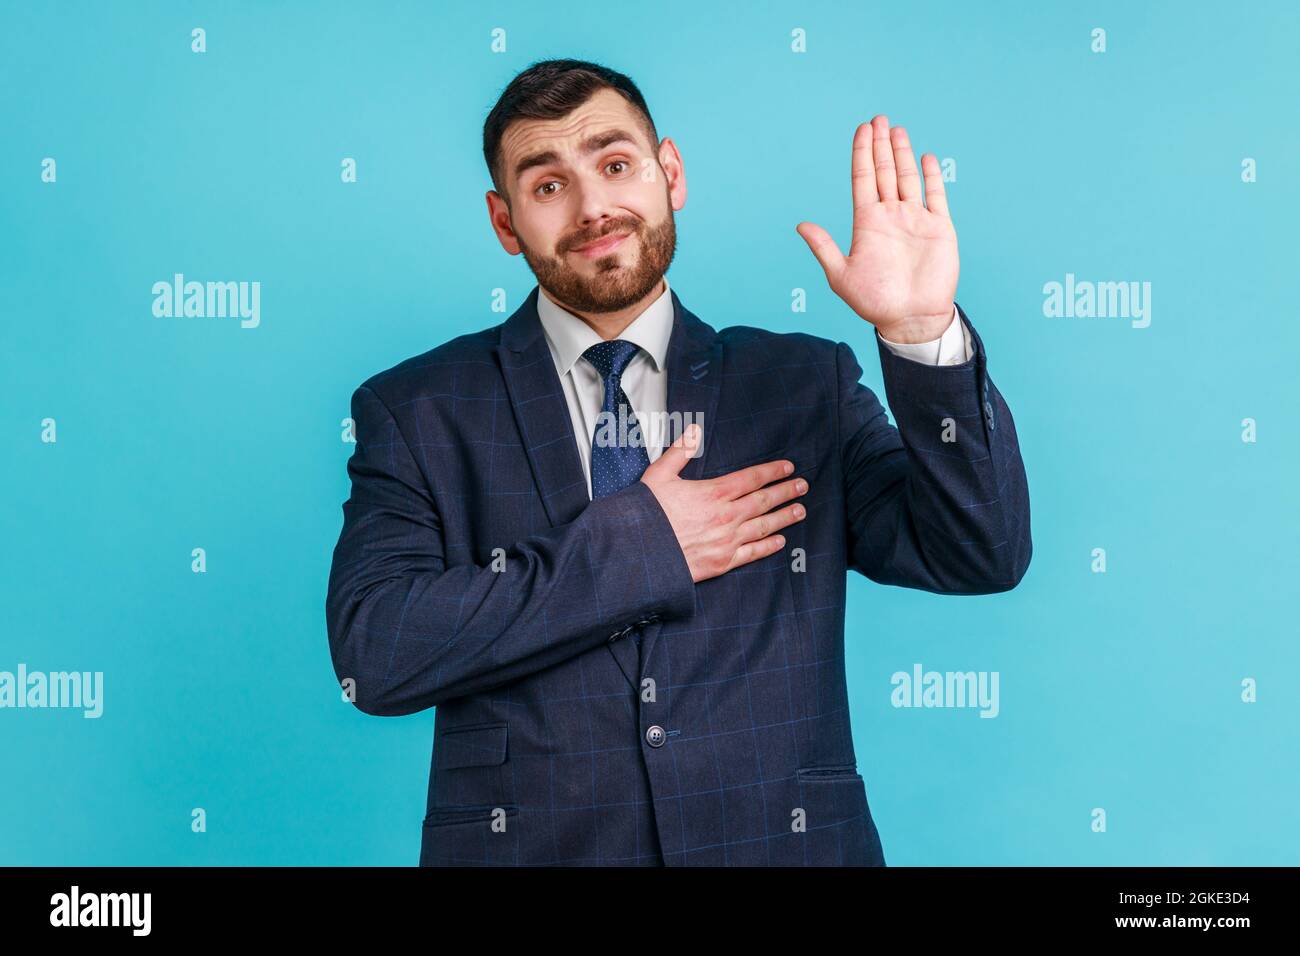 I promise to tell truth! Bearded man wearing official style suit standing raising hand and saying swear, making loyalty oath, pledging allegiance. Ind Stock Photo